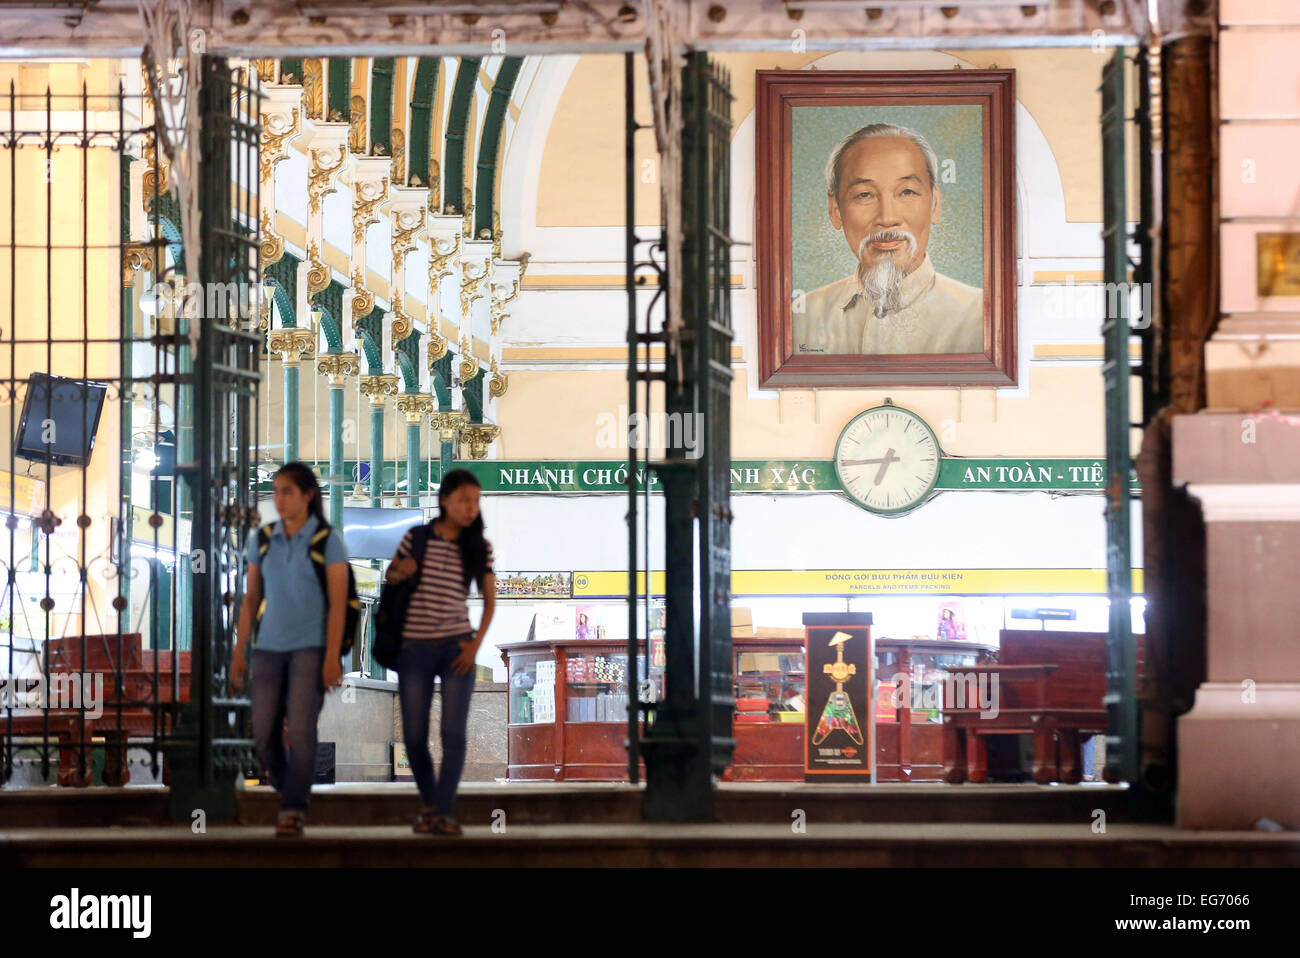 Two women are leaving a post office in Ho Chi Minh City on 21st November 2014. A portrait of Ho Chi Minh is hanging on the wall. Stock Photo